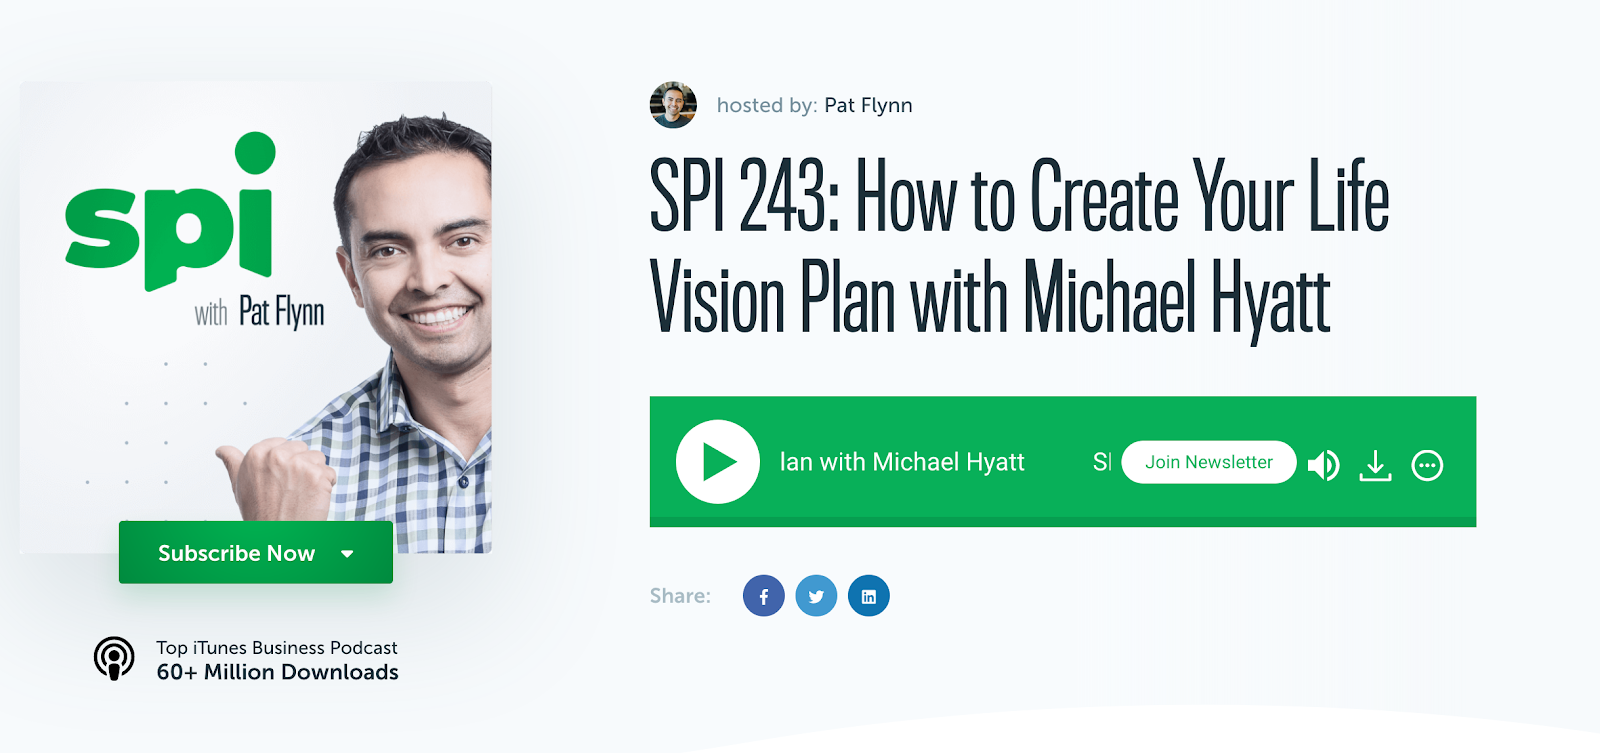 Hosted by Pat Flynn: How to Create Your Life Vision Plan with Michael Hyatt